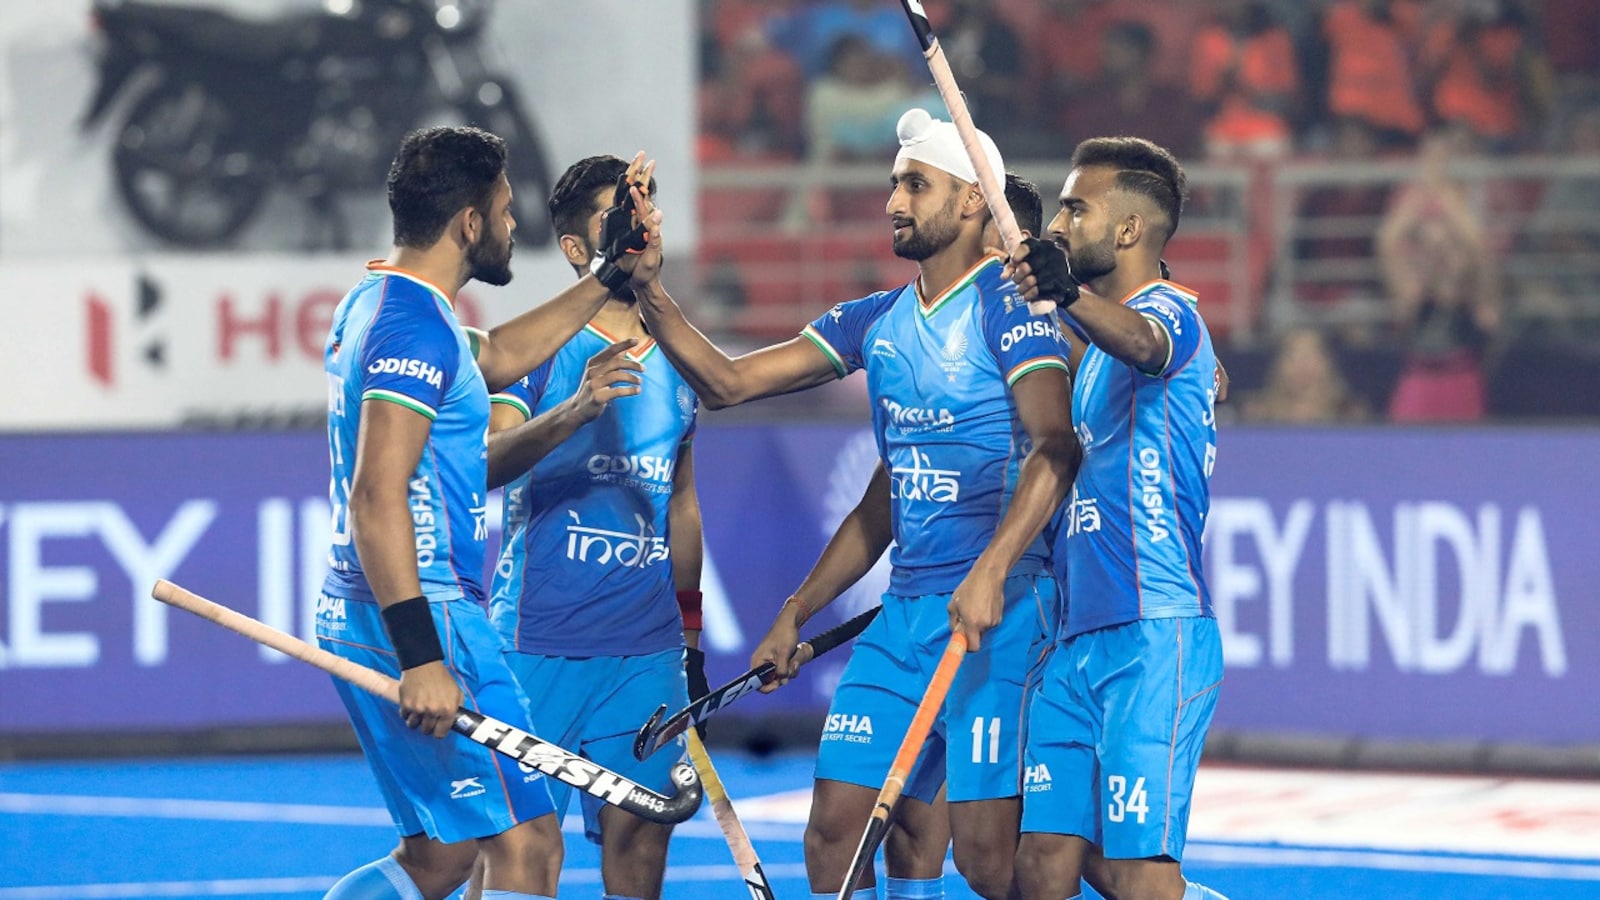 Where did Indian men's hockey team finish in FIH Pro League 2023?